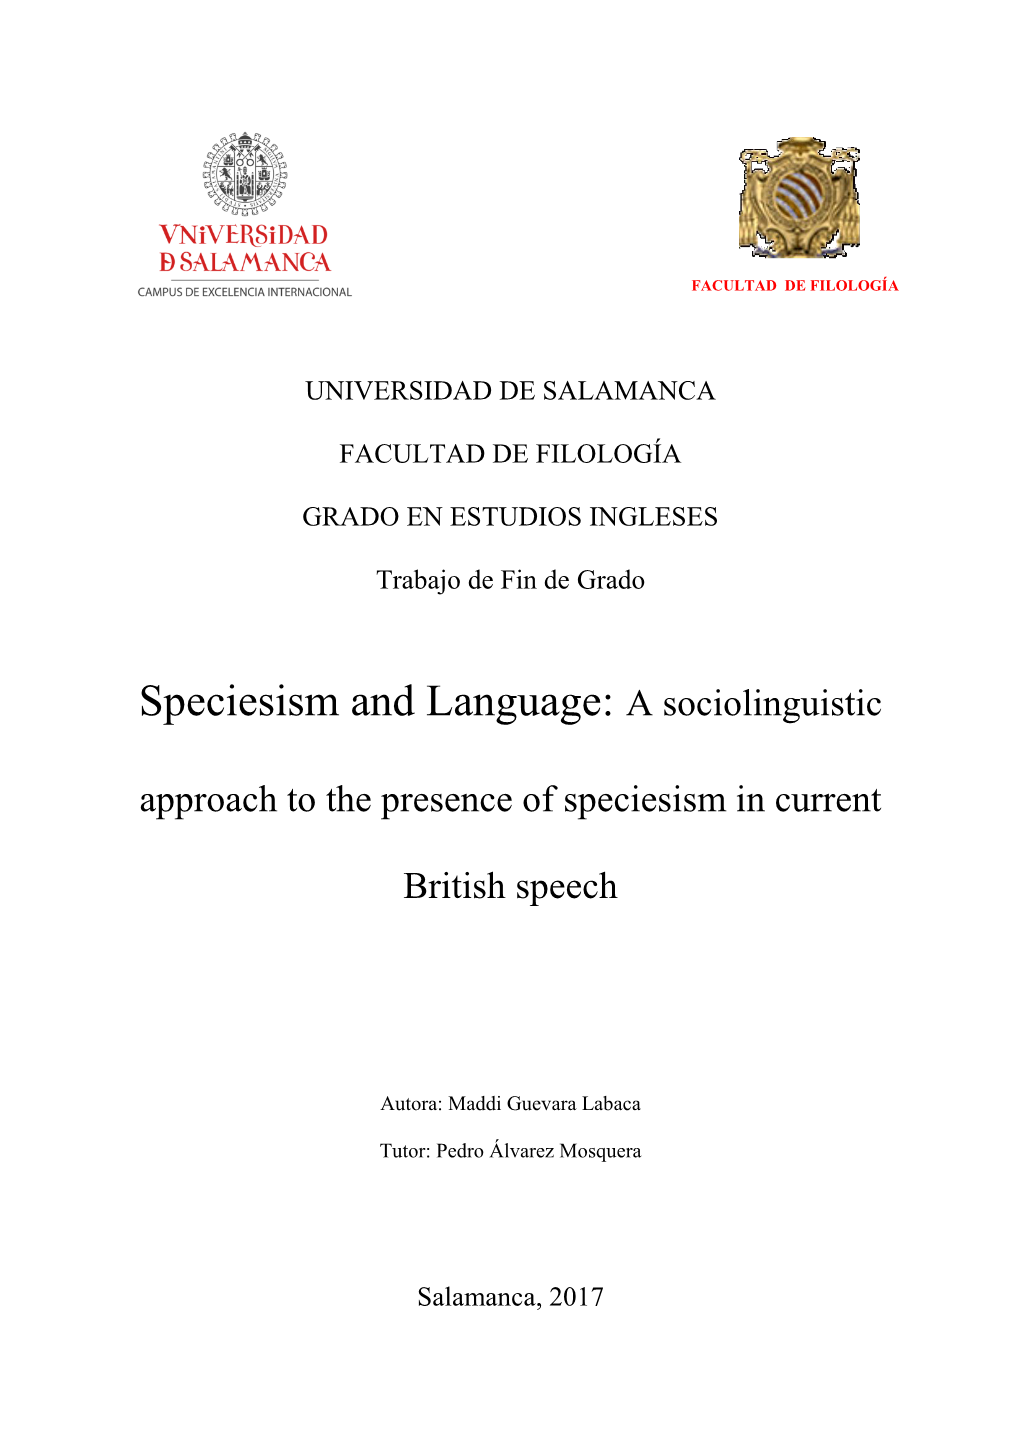 Speciesism and Language: a Sociolinguistic Approach to the Presence of Speciesism in Current